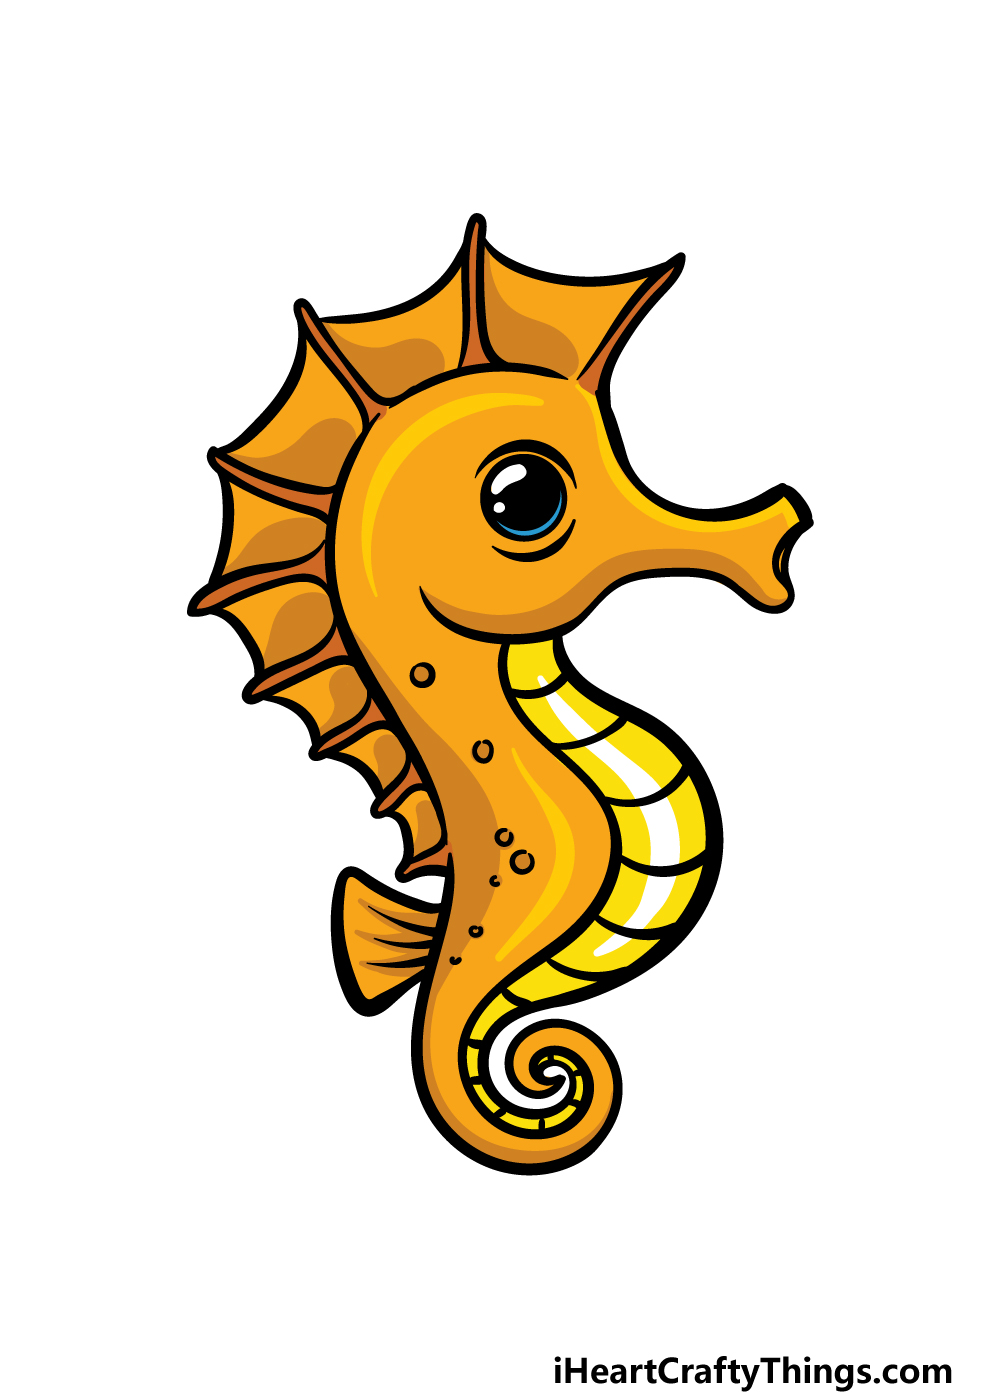 Cartoon Seahorse Drawing - How To Draw A Cartoon Seahorse Step By Step!